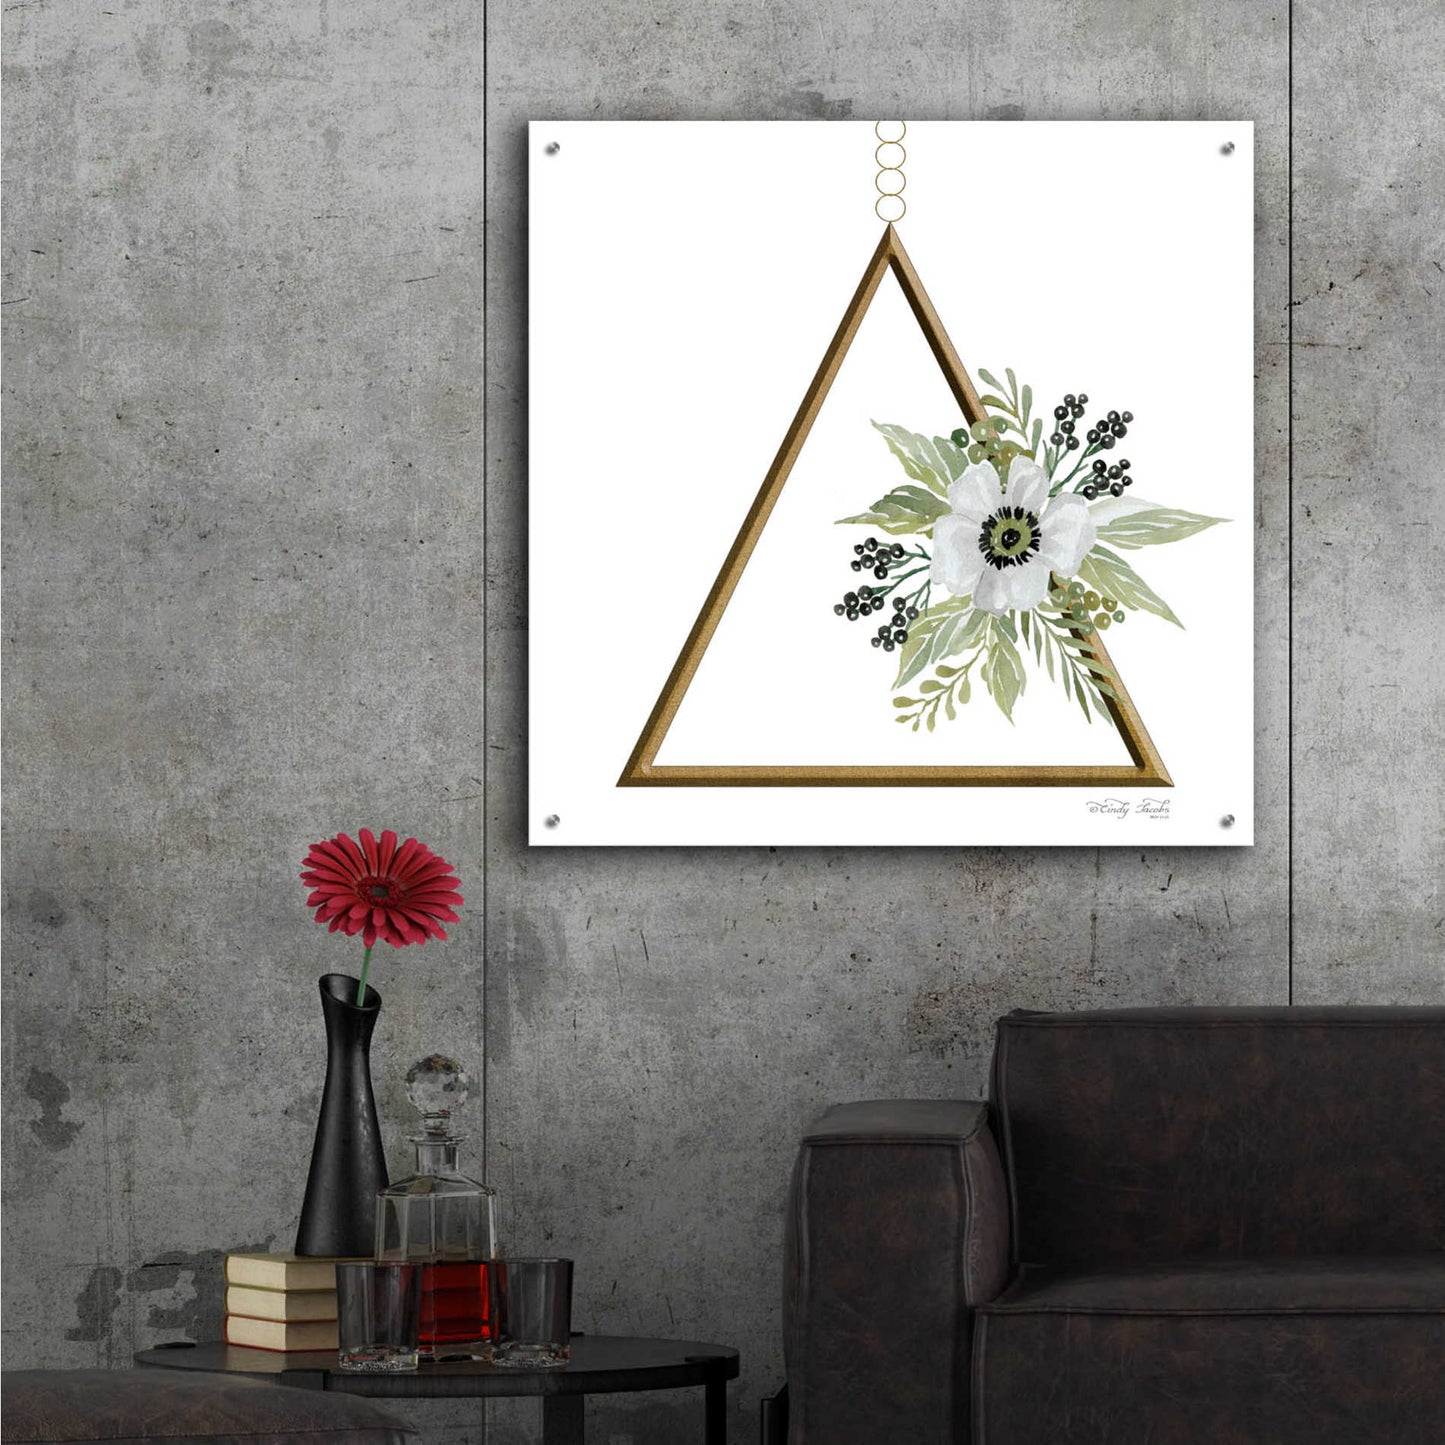 Epic Art 'Geometric Triangle Muted Floral II' by Cindy Jacobs, Acrylic Glass Wall Art,36x36